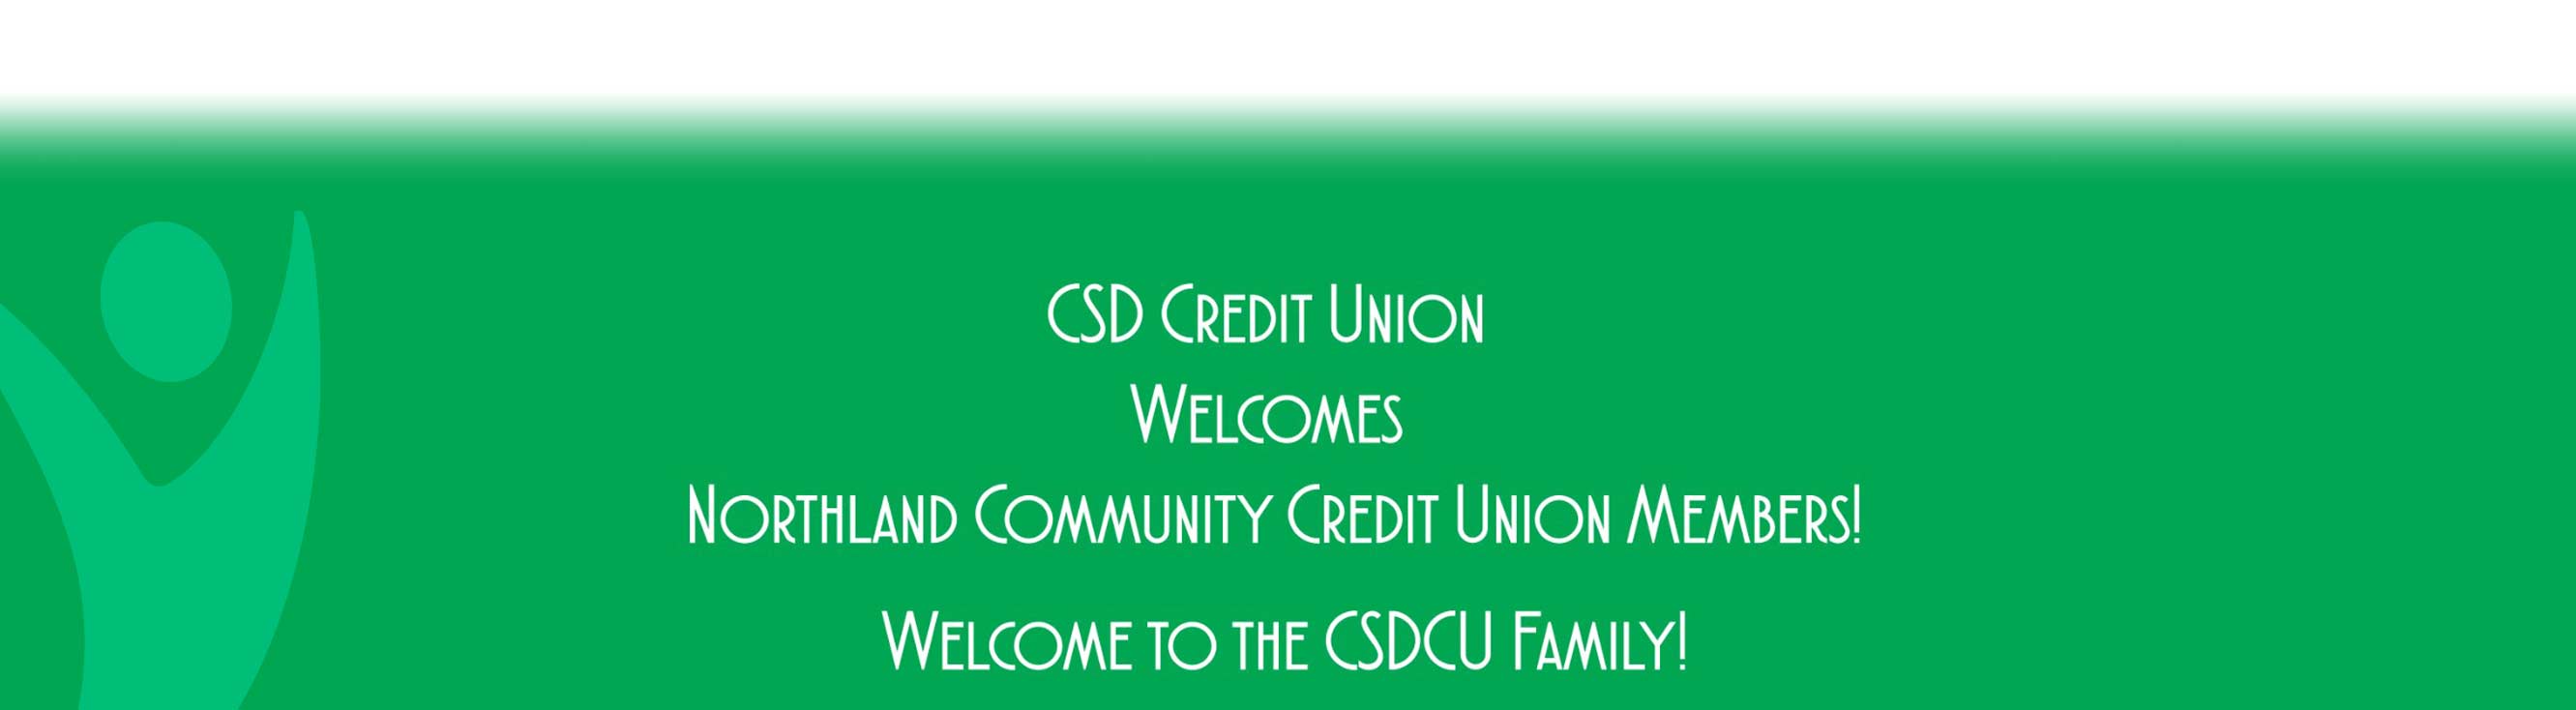 CSD Credit Union Welcomes Northland Community Credit Union Members! Welcome to the CSDCU Family!